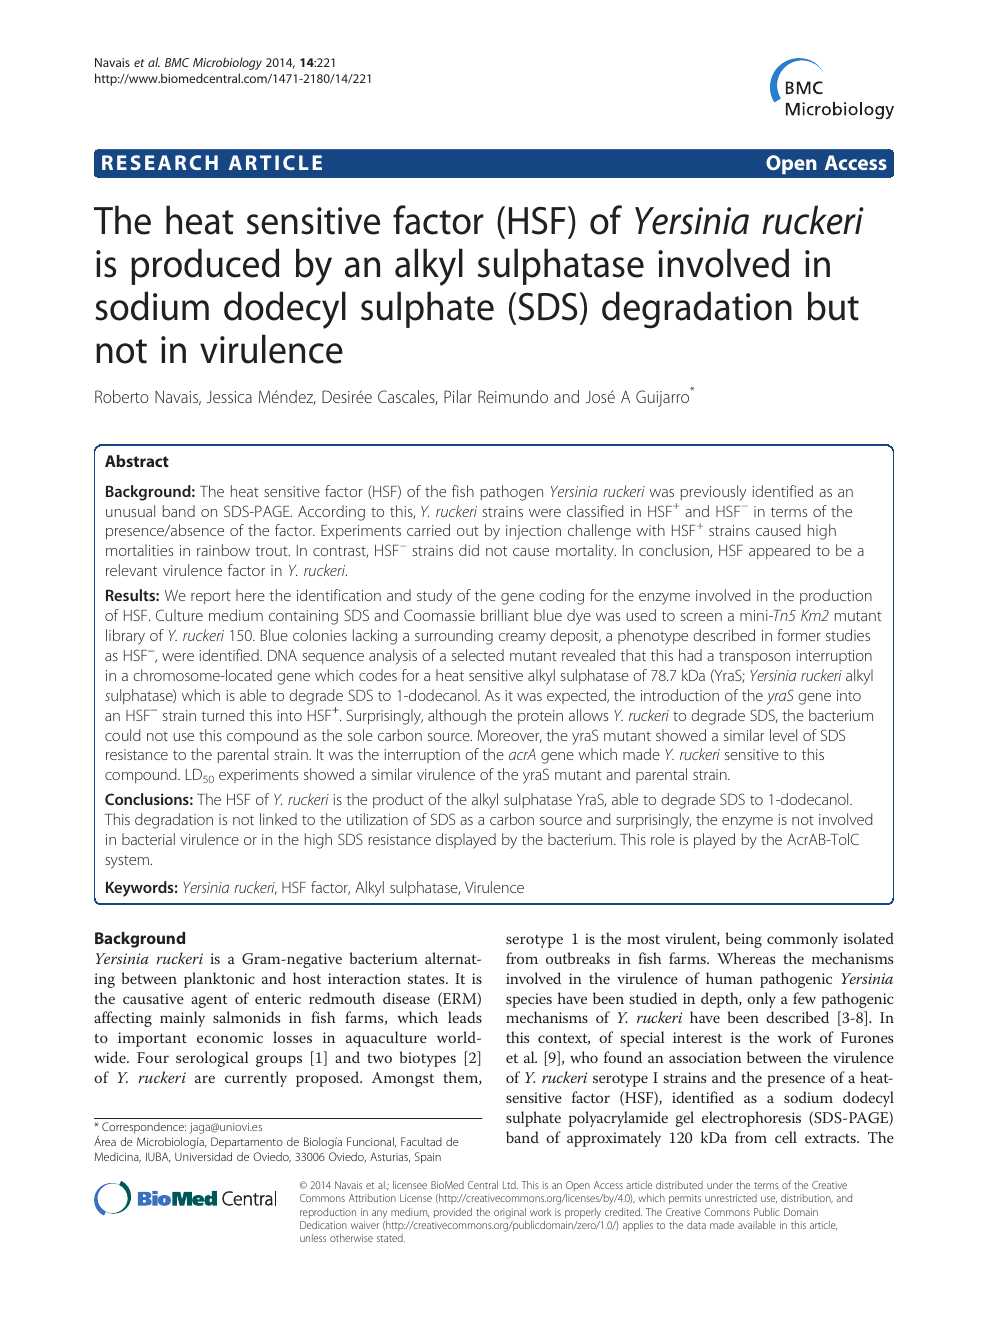 The Heat Sensitive Factor Hsf Of Yersinia Ruckeri Is Produced By An Alkyl Sulphatase Involved In Sodium Dodecyl Sulphate Sds Degradation But Not In Virulence Topic Of Research Paper In Biological